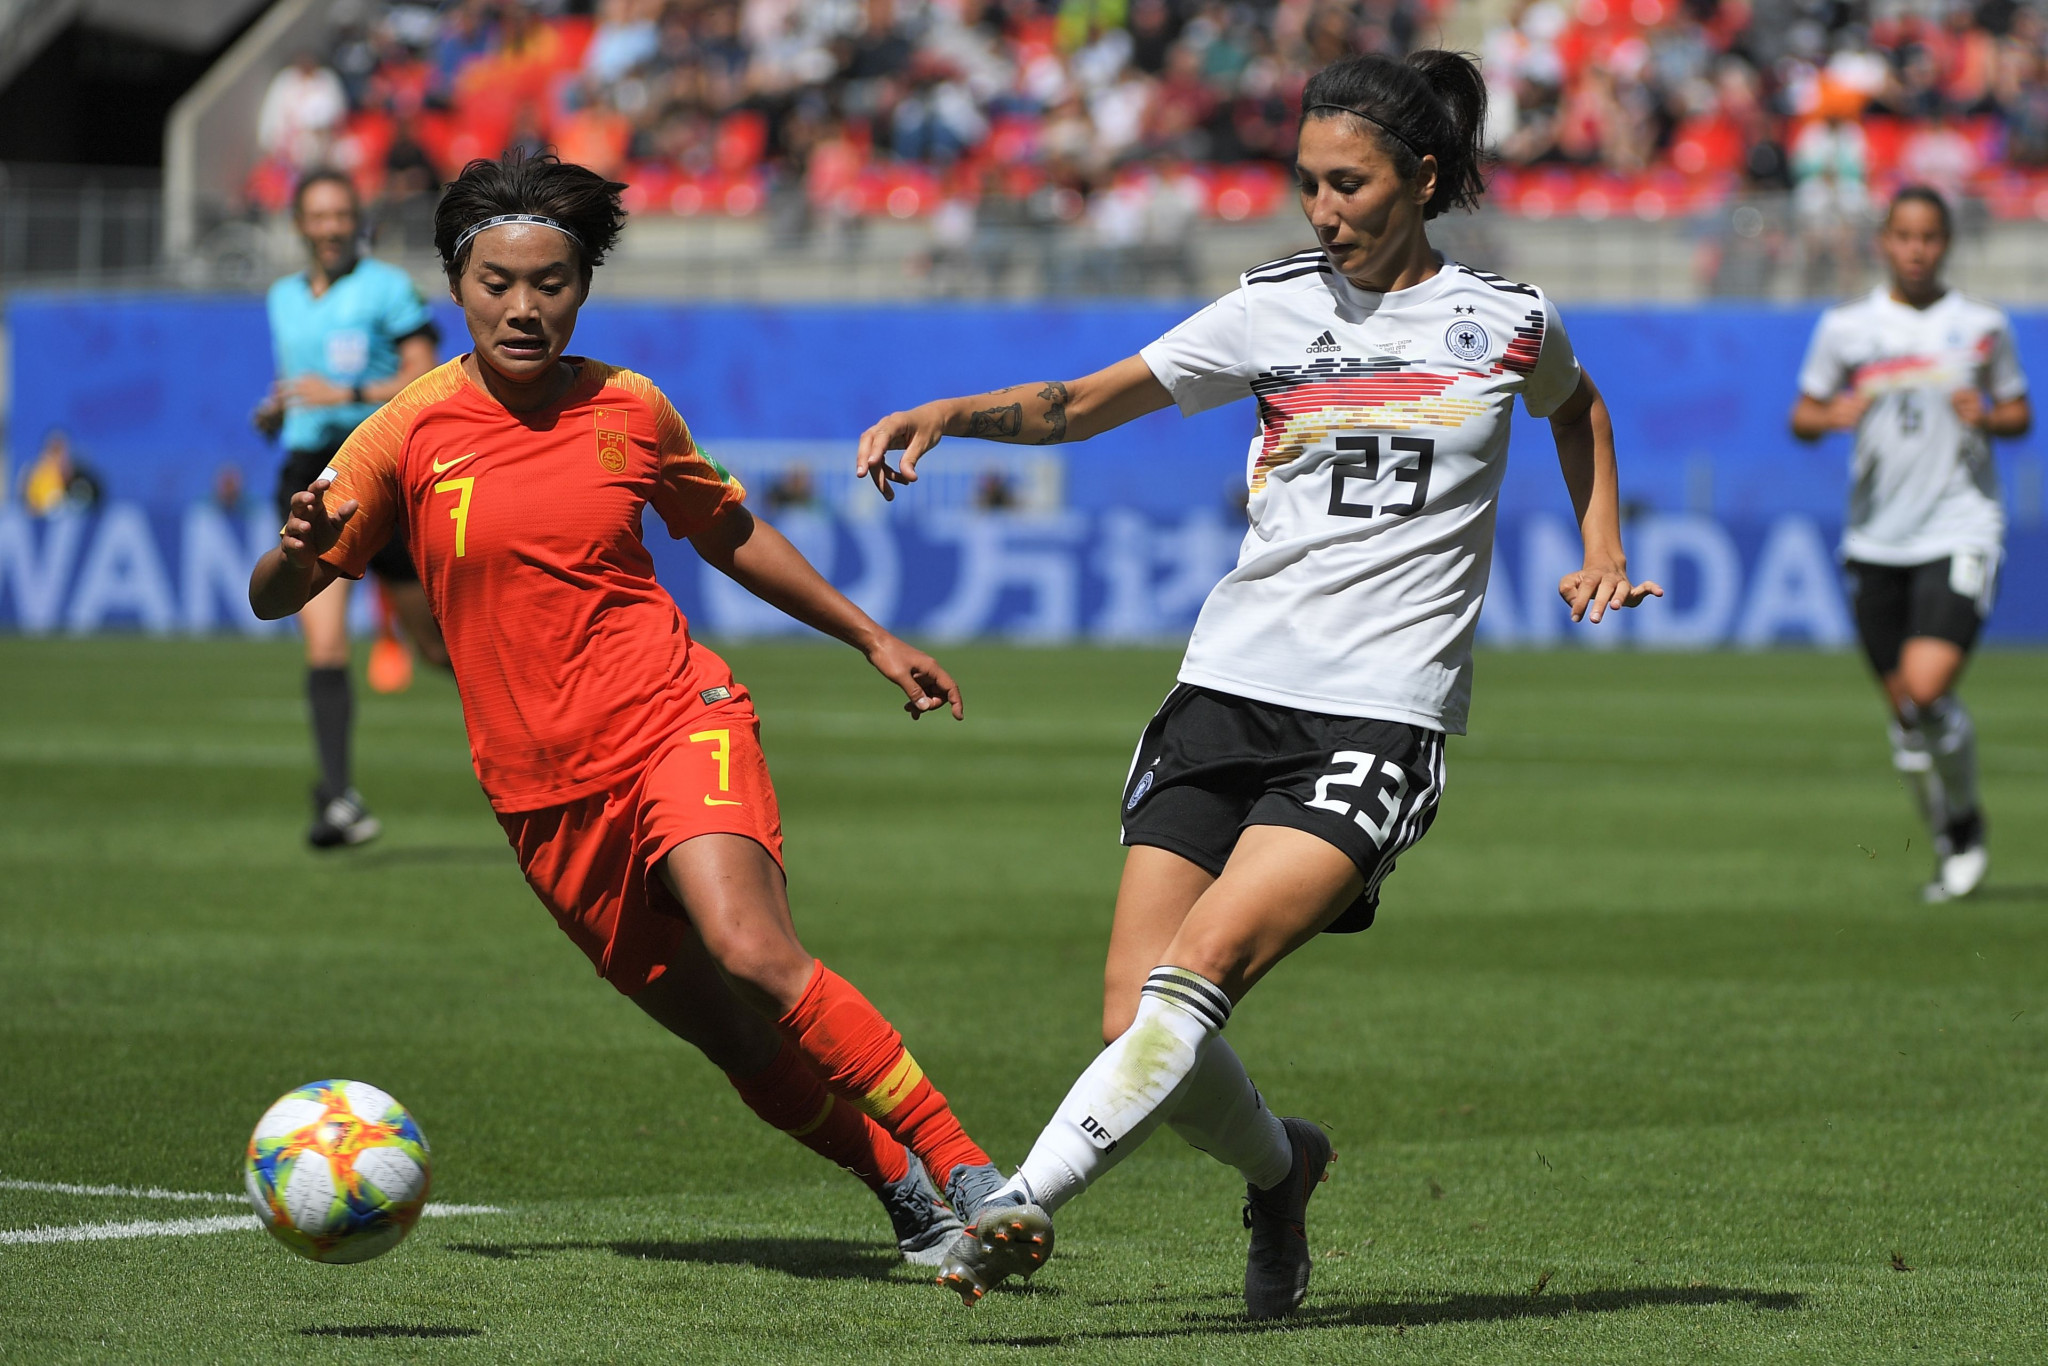 Germany narrowly defeated China 1-0 at the FIFA Women's World Cup ©Getty Images